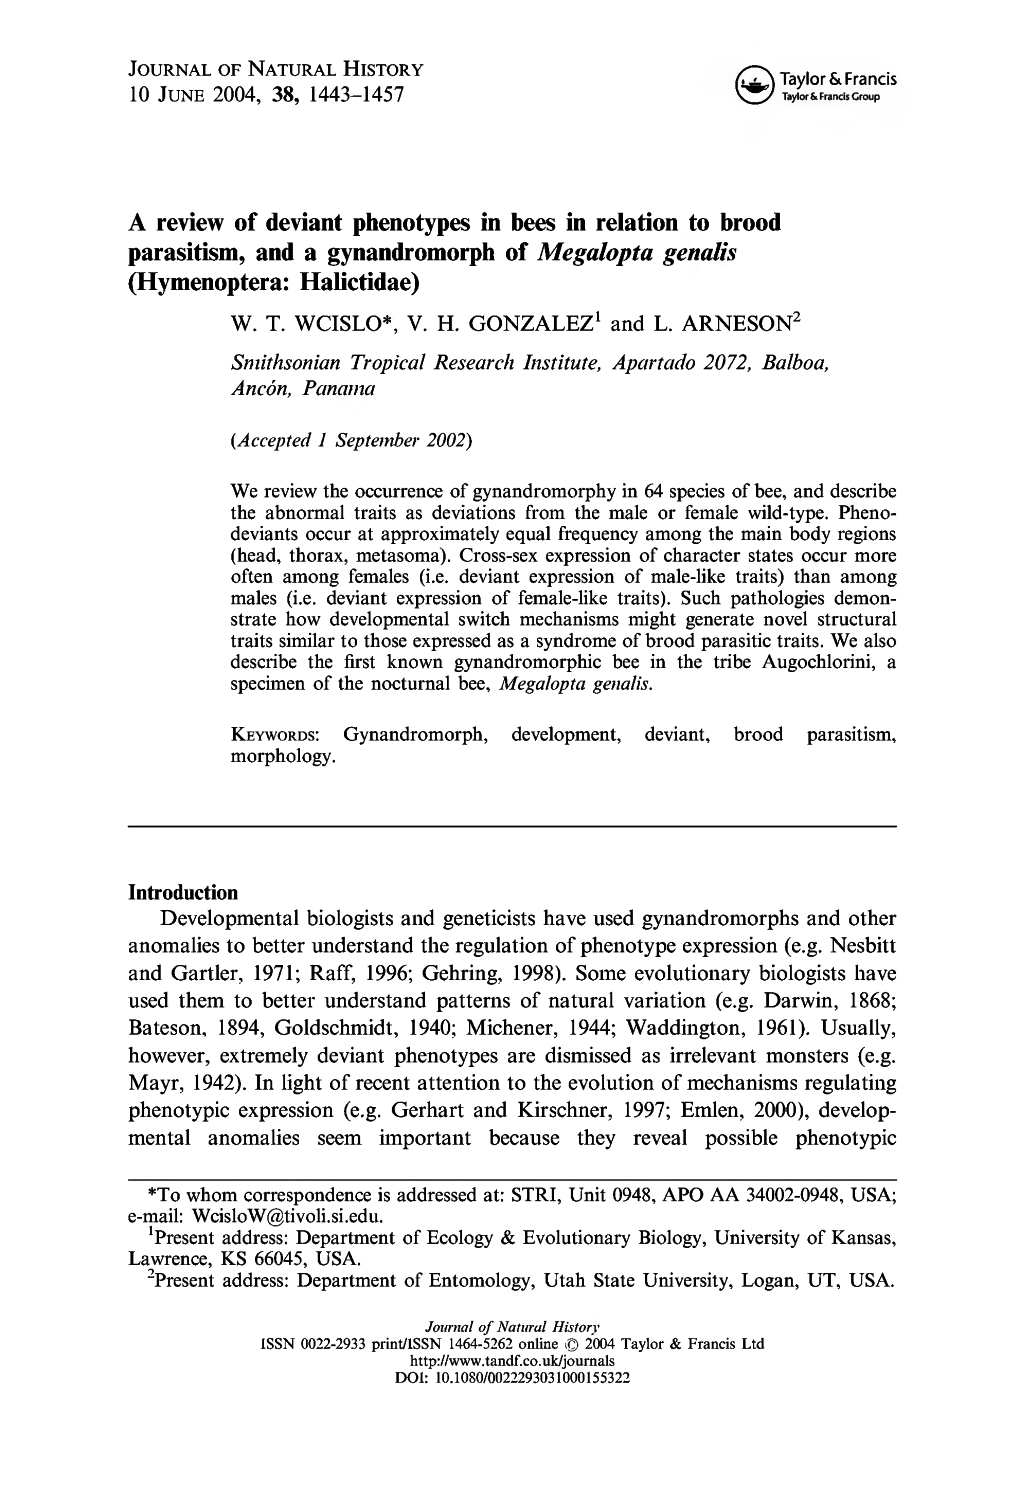 A Review of Deviant Phenotypes in Bees in Relation to Brood Parasitism, and a Gynandromorph of Megalopta Genalis (Hymenoptera: Halictidae) W